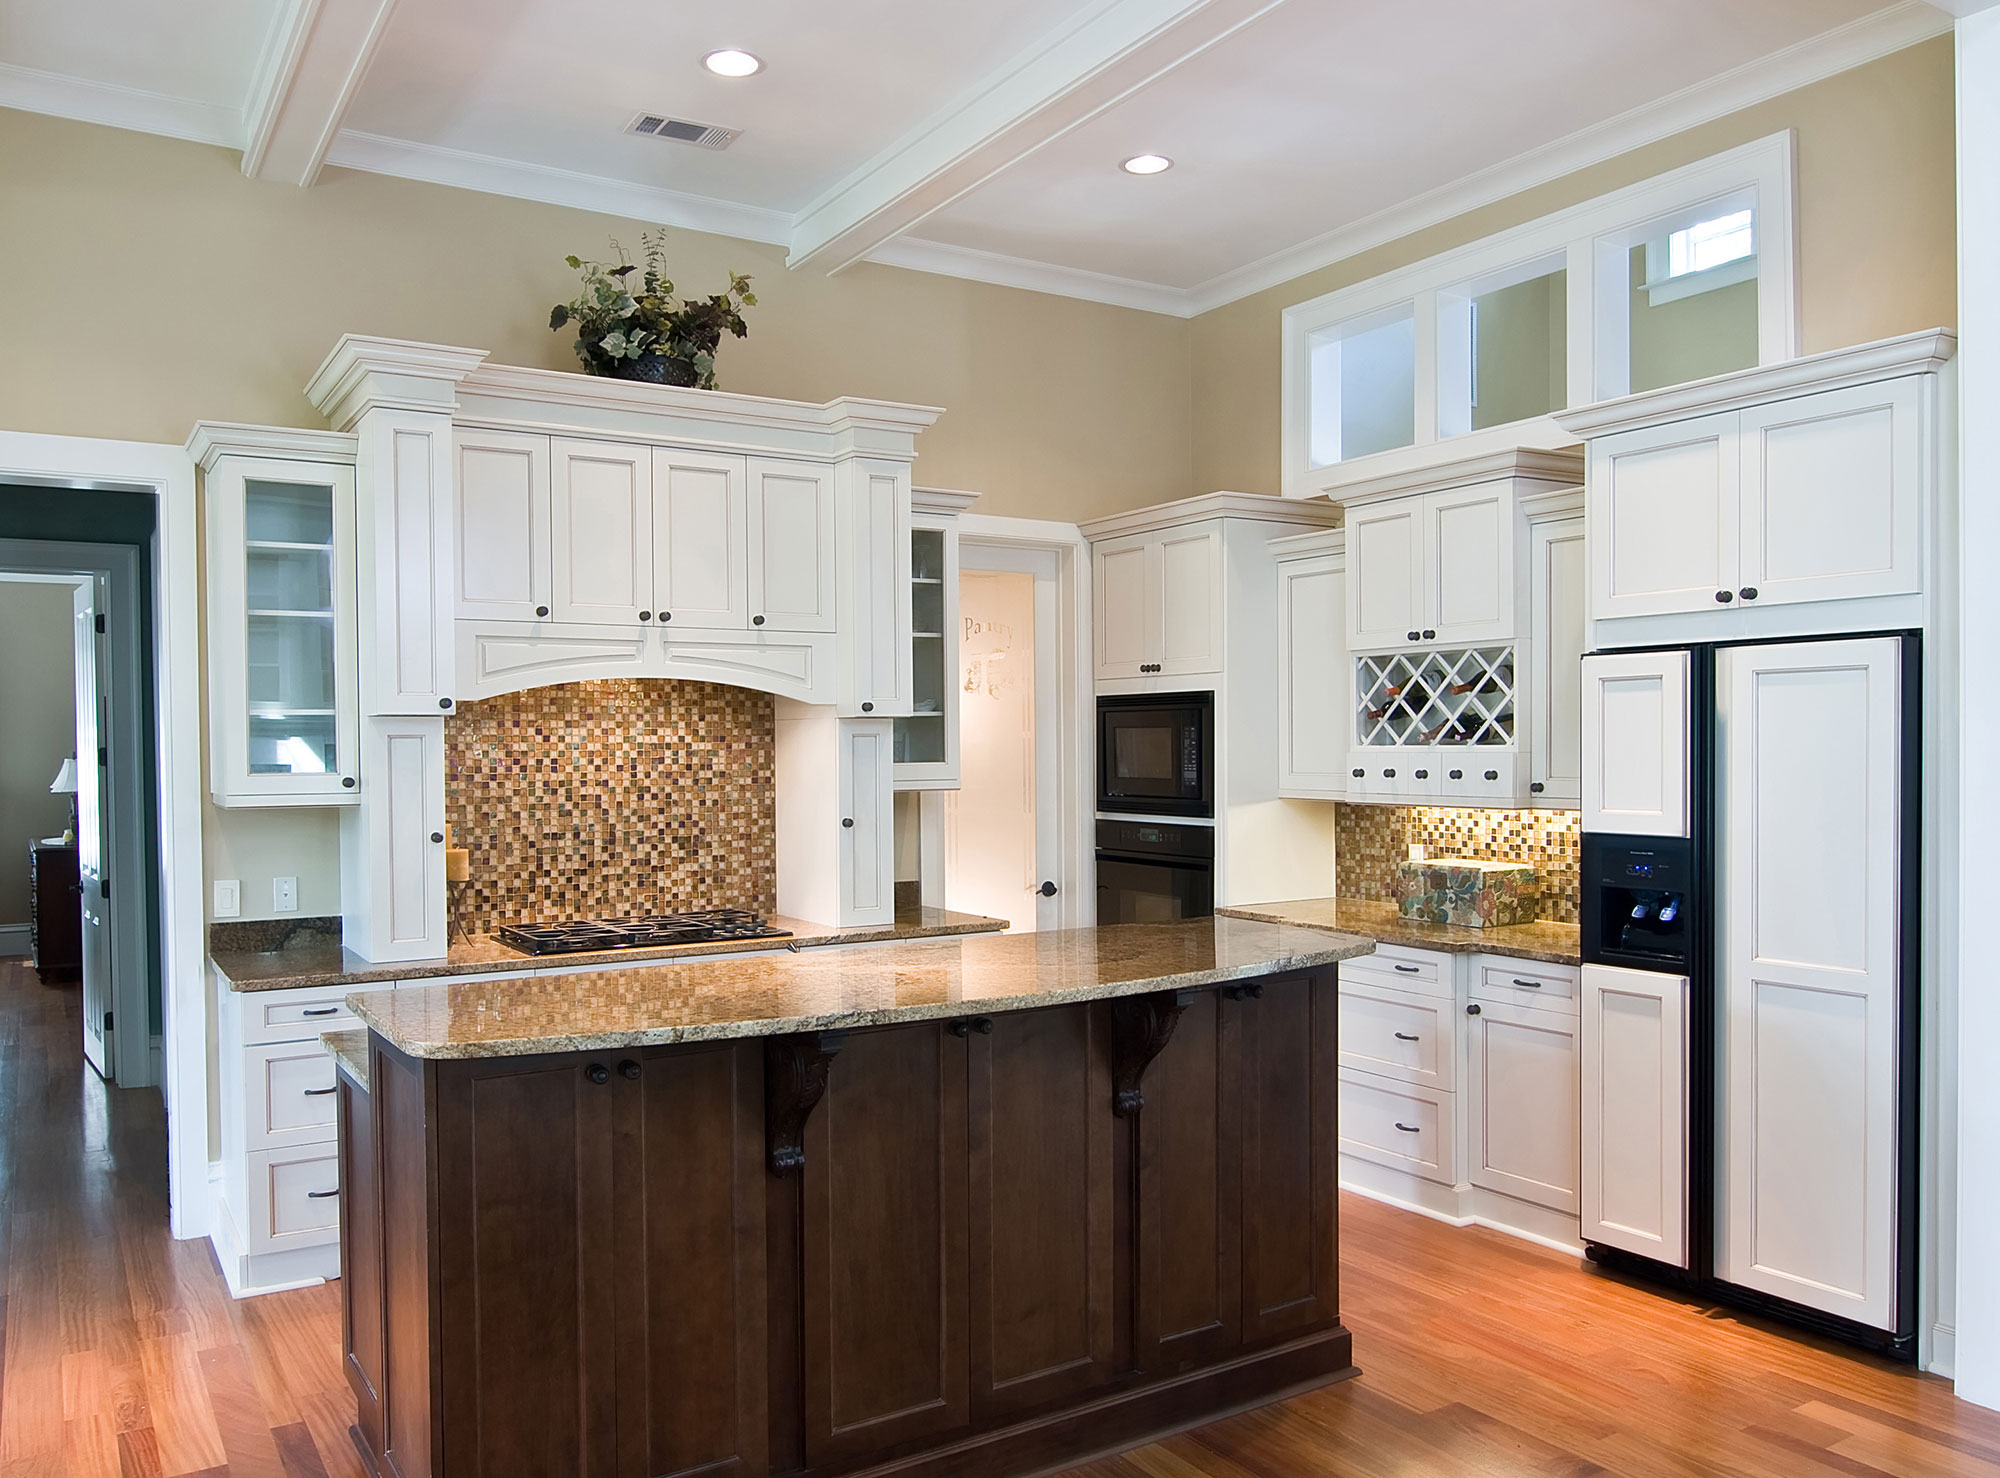 Custom Cabinets Near Me, Local Remodeling Contractors ...